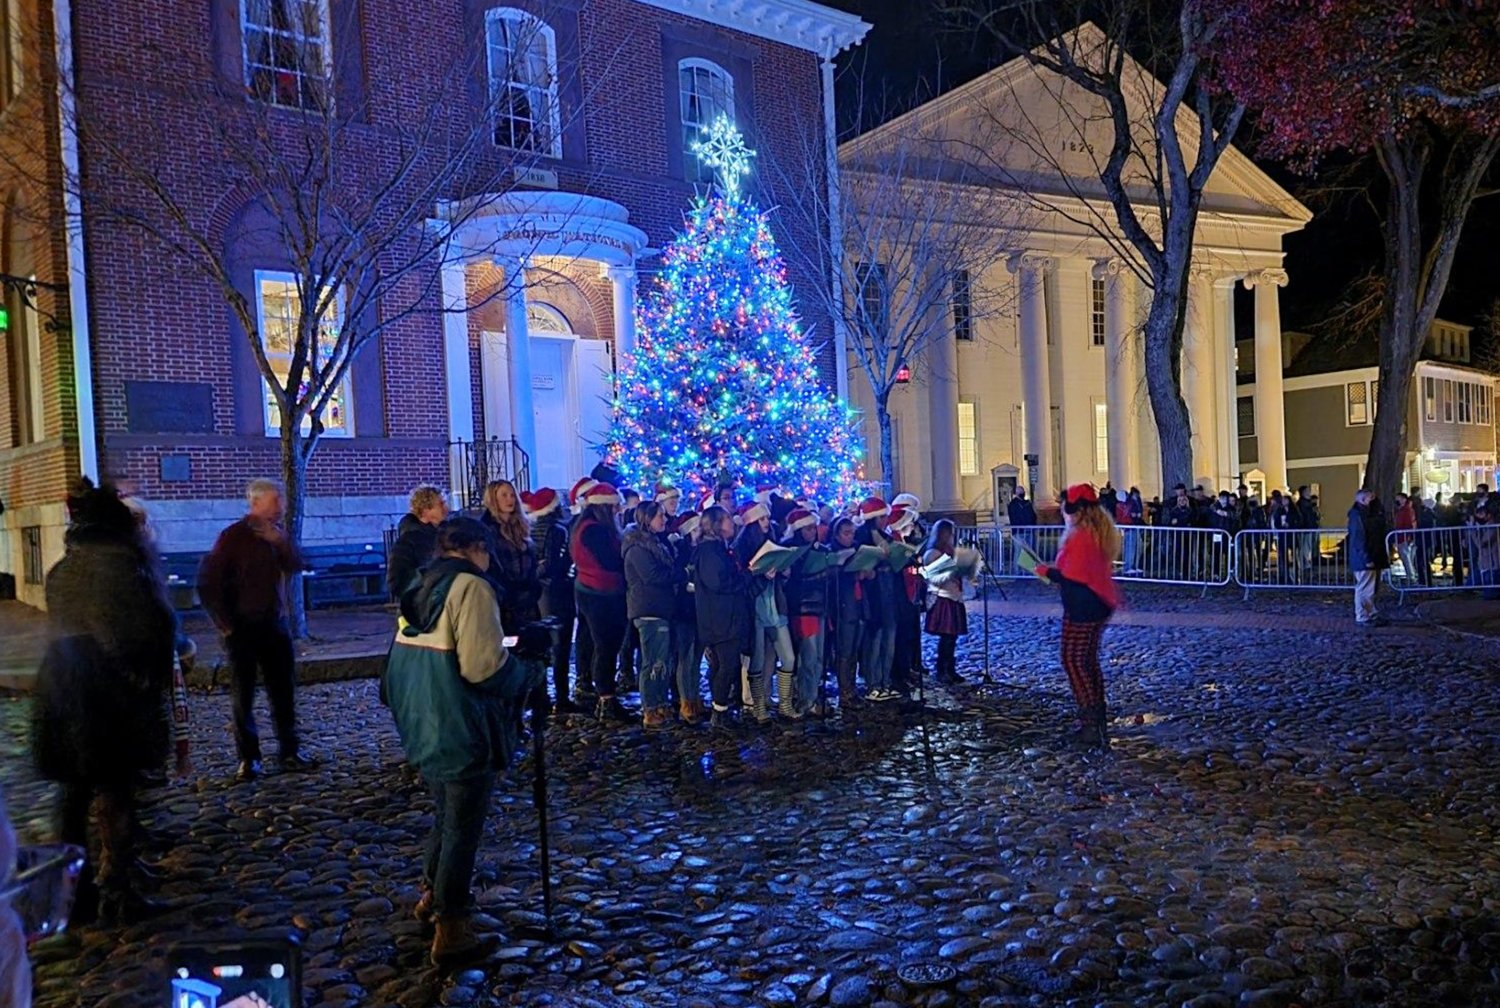 Metal barricades kept the crowd of more than 1,000 on Main Street away from the tree lighting and the Accidentals and Naturals Nantucket High School chorus Friday.